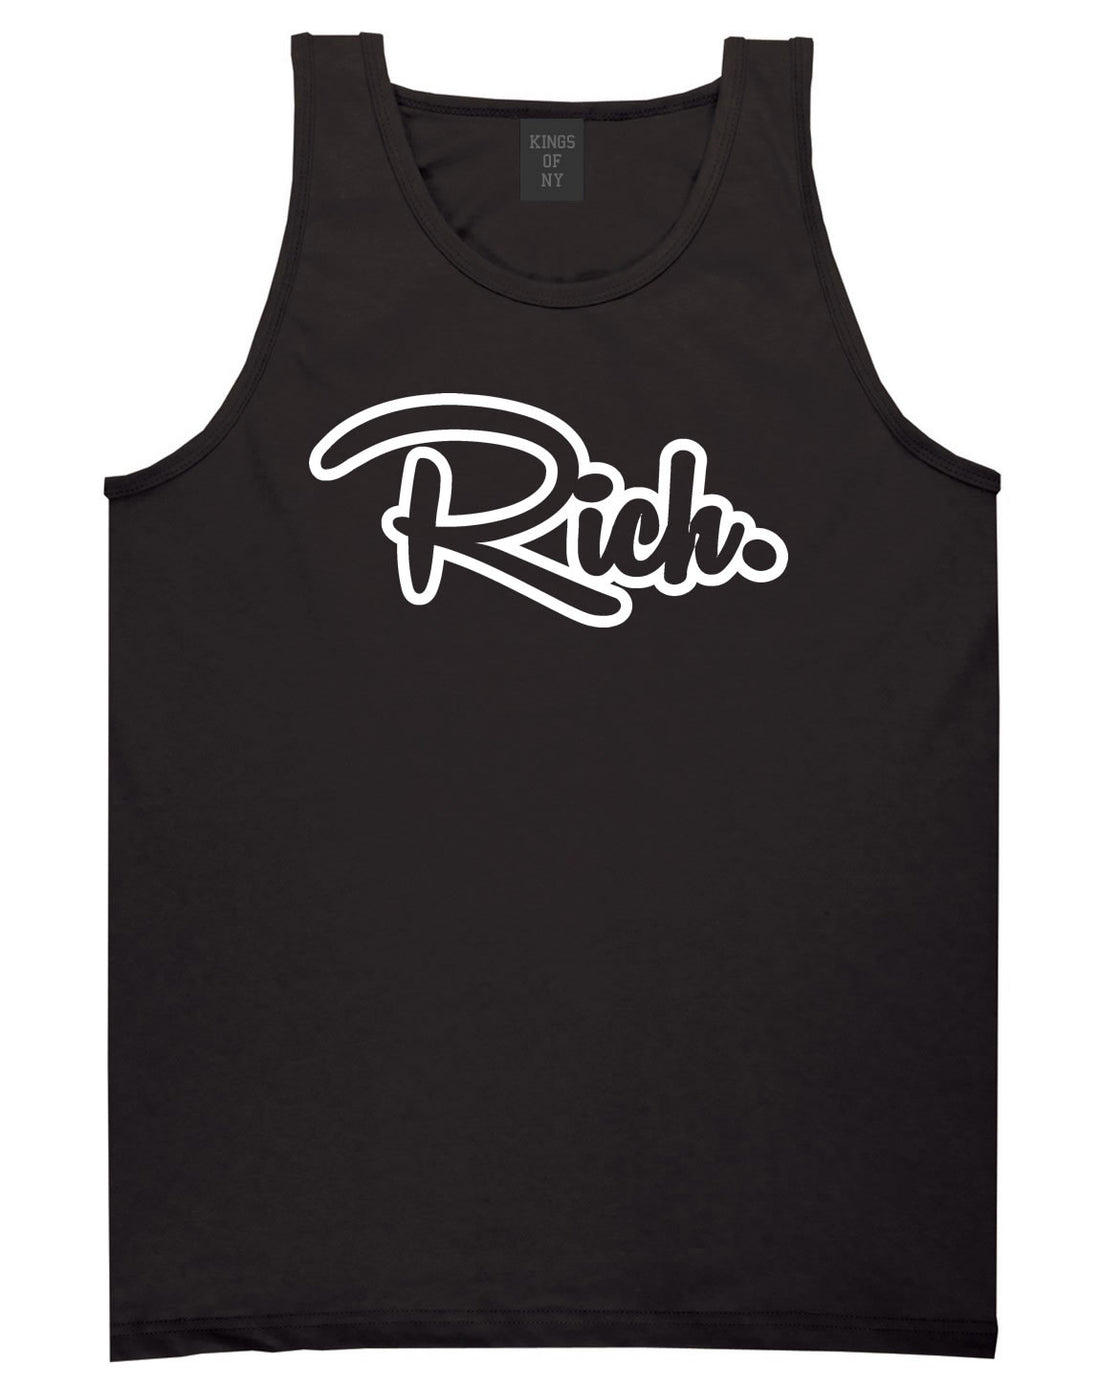 Rich Money Fab Style New York Richie NYC Tank Top In Black by Kings Of NY